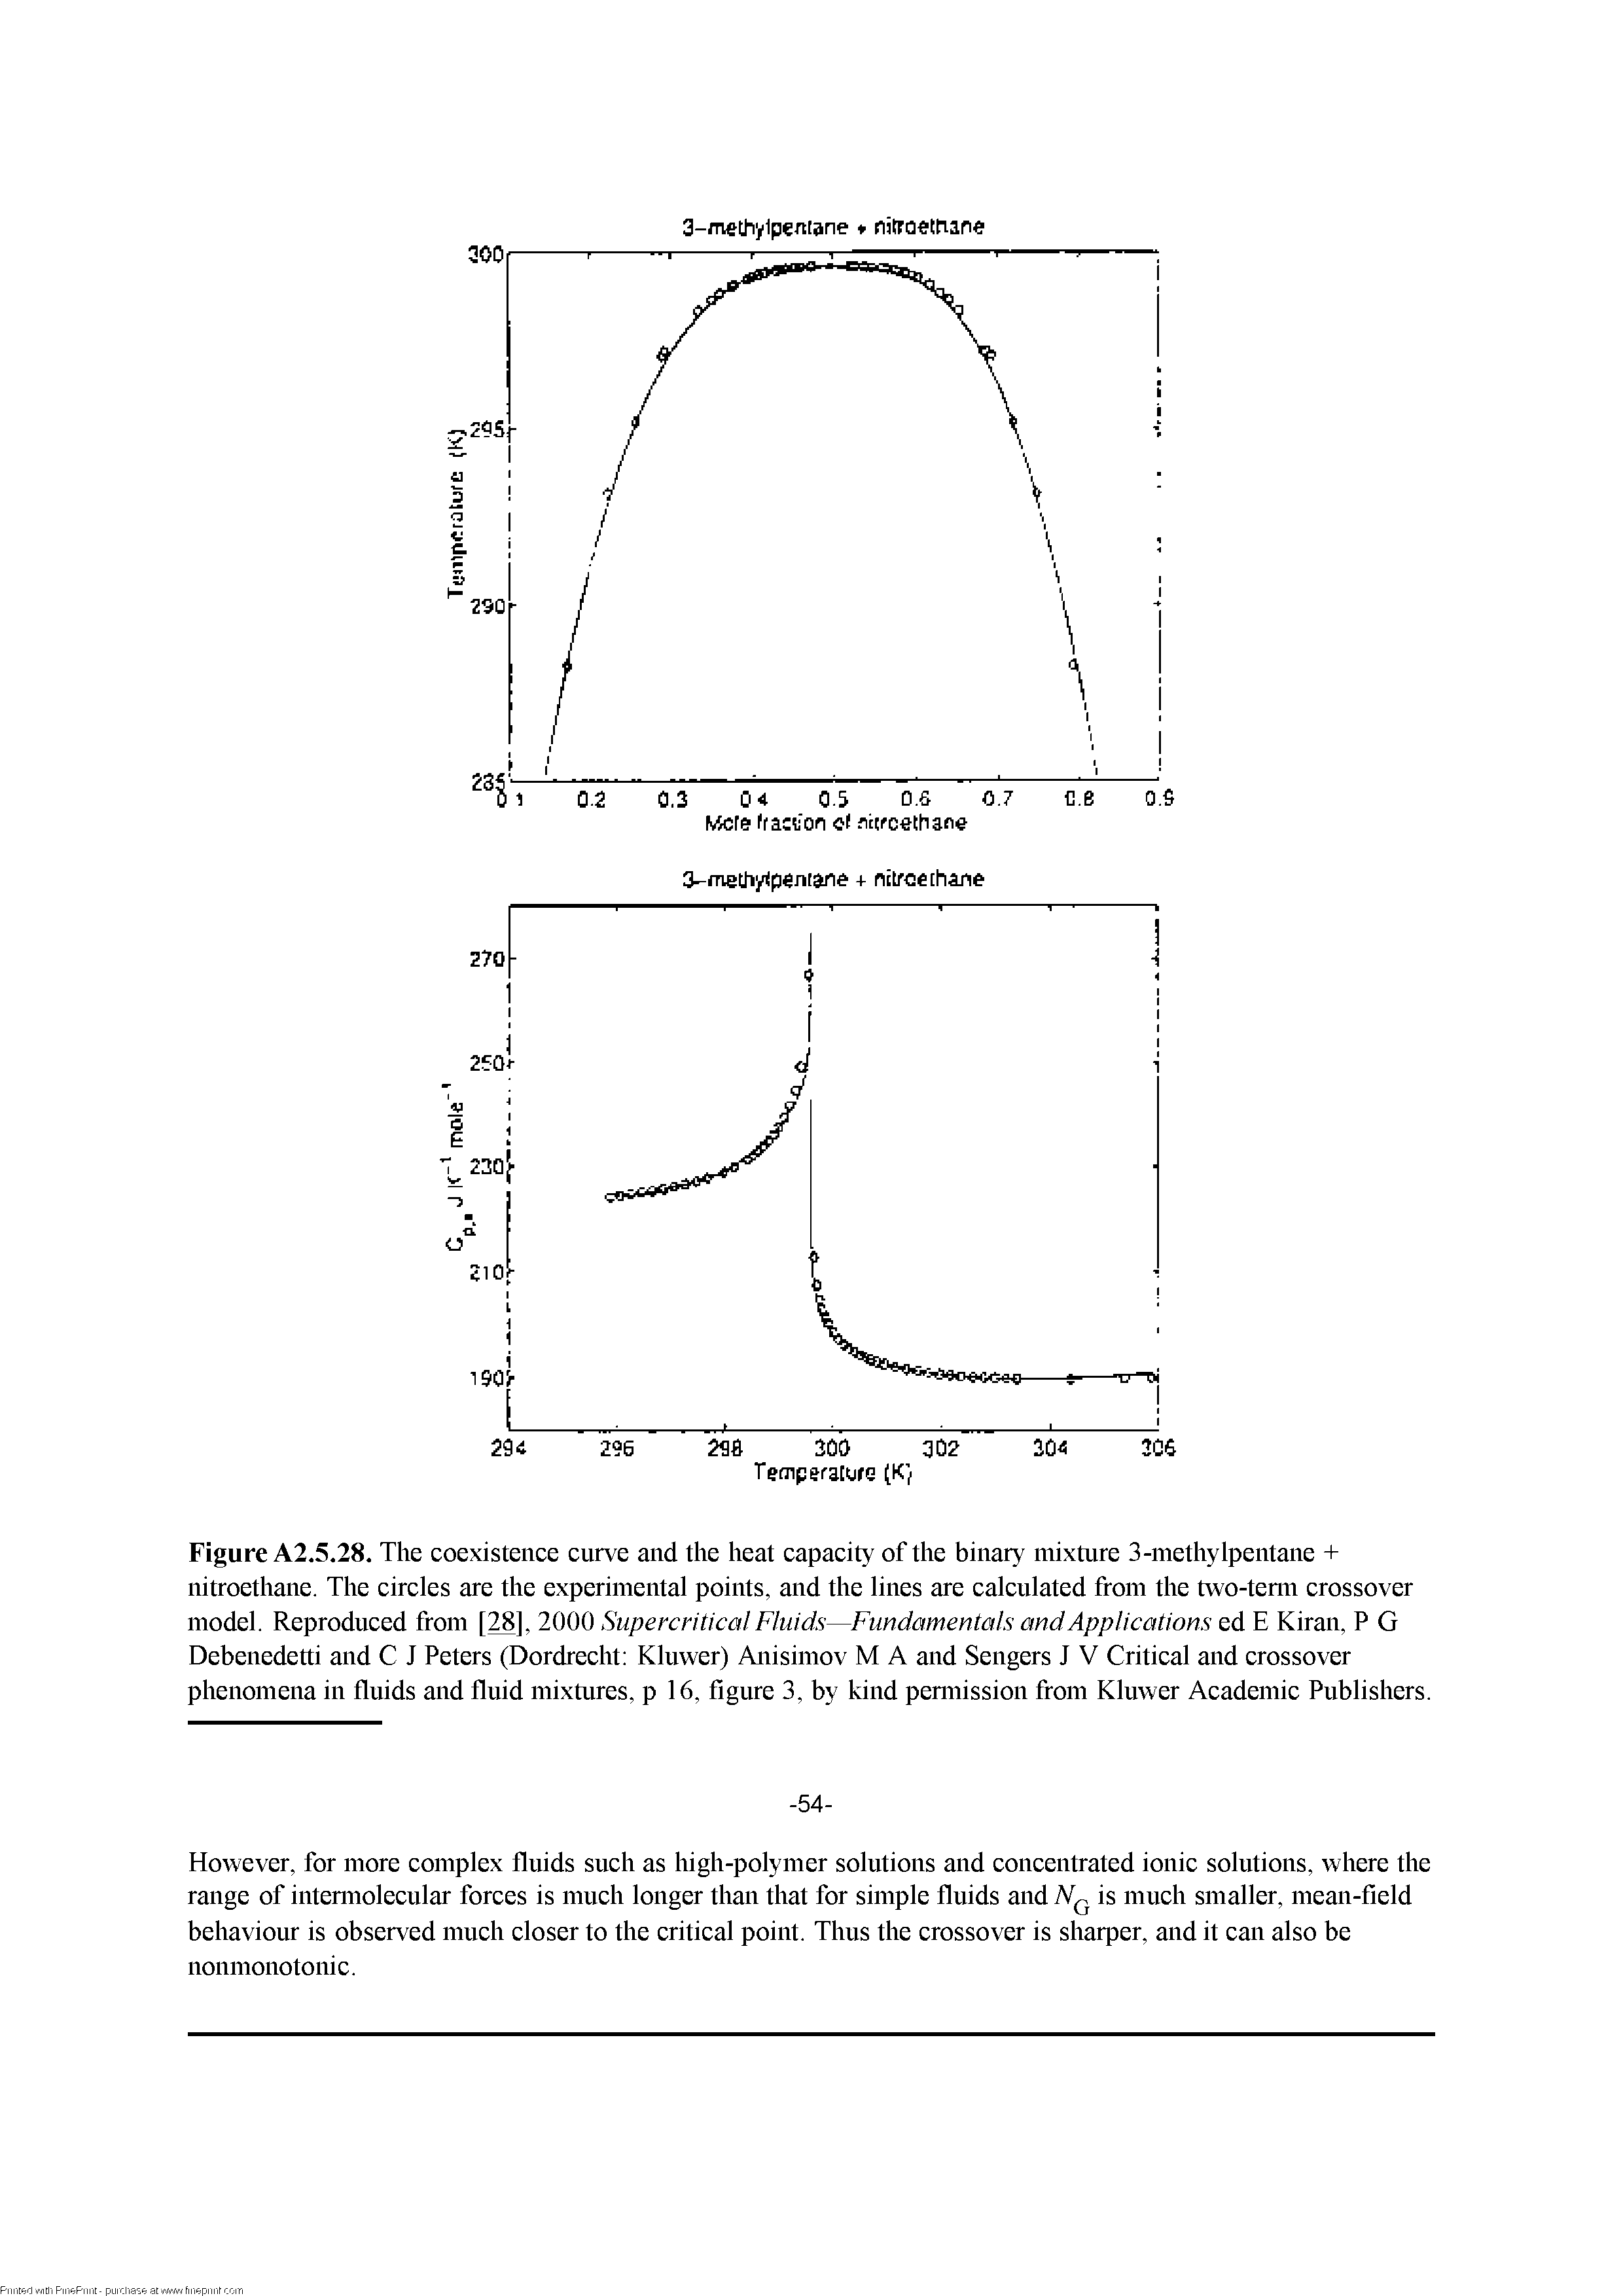 Figure A2.5.28. The coexistence curve and the heat capacity of the binary mixture 3-methylpentane + nitroethane. The circles are the experimental points, and the lines are calculated from the two-tenn crossover model. Reproduced from [28], 2000 Supercritical Fluids—Fundamentals and Applications ed E Kiran, P G Debenedetti and C J Peters (Dordrecht Kluwer) Anisimov M A and Sengers J V Critical and crossover phenomena in fluids and fluid mixtures, p 16, figure 3, by kind pemiission from Kluwer Academic Publishers.